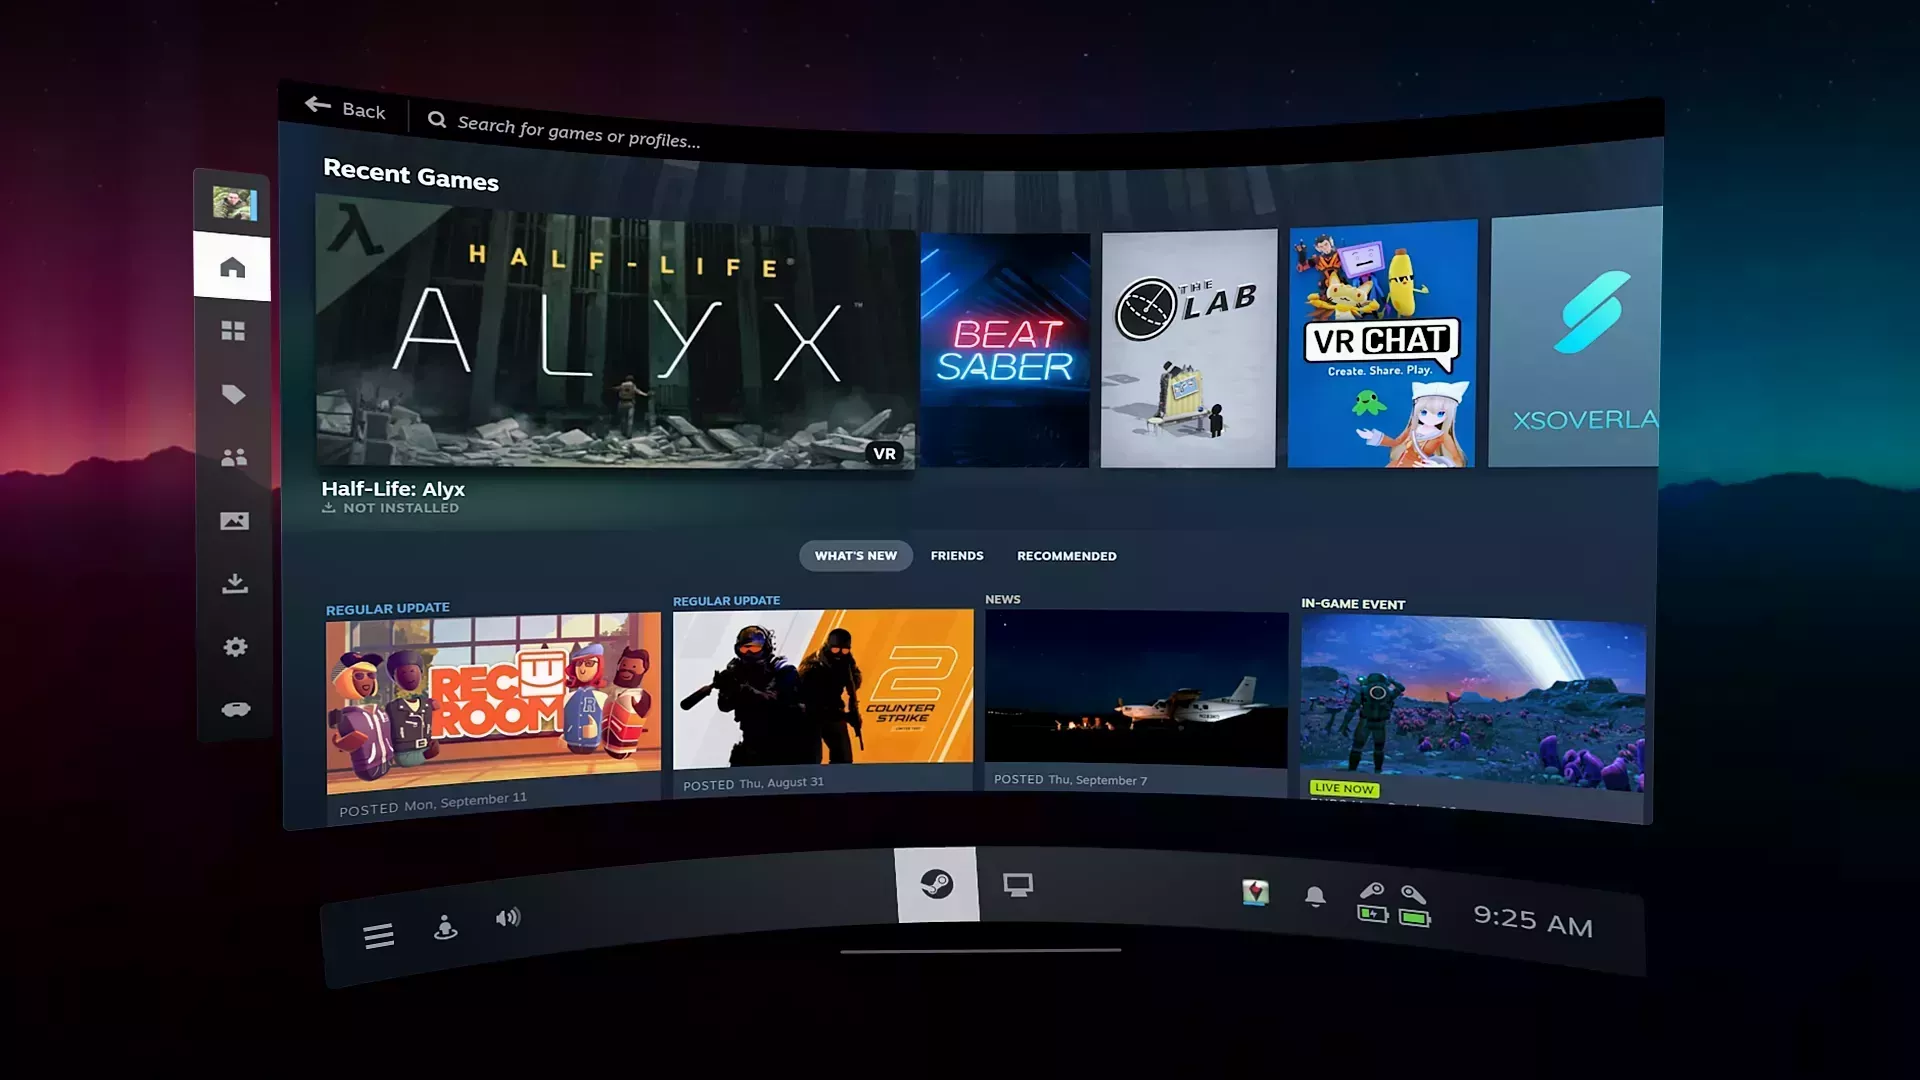 The image shows the new SteamVR 2.0 Dashboard. It has the old Steam Home background, but with the new dashboard. It contains games in large tiles and a bar with menus on the left.